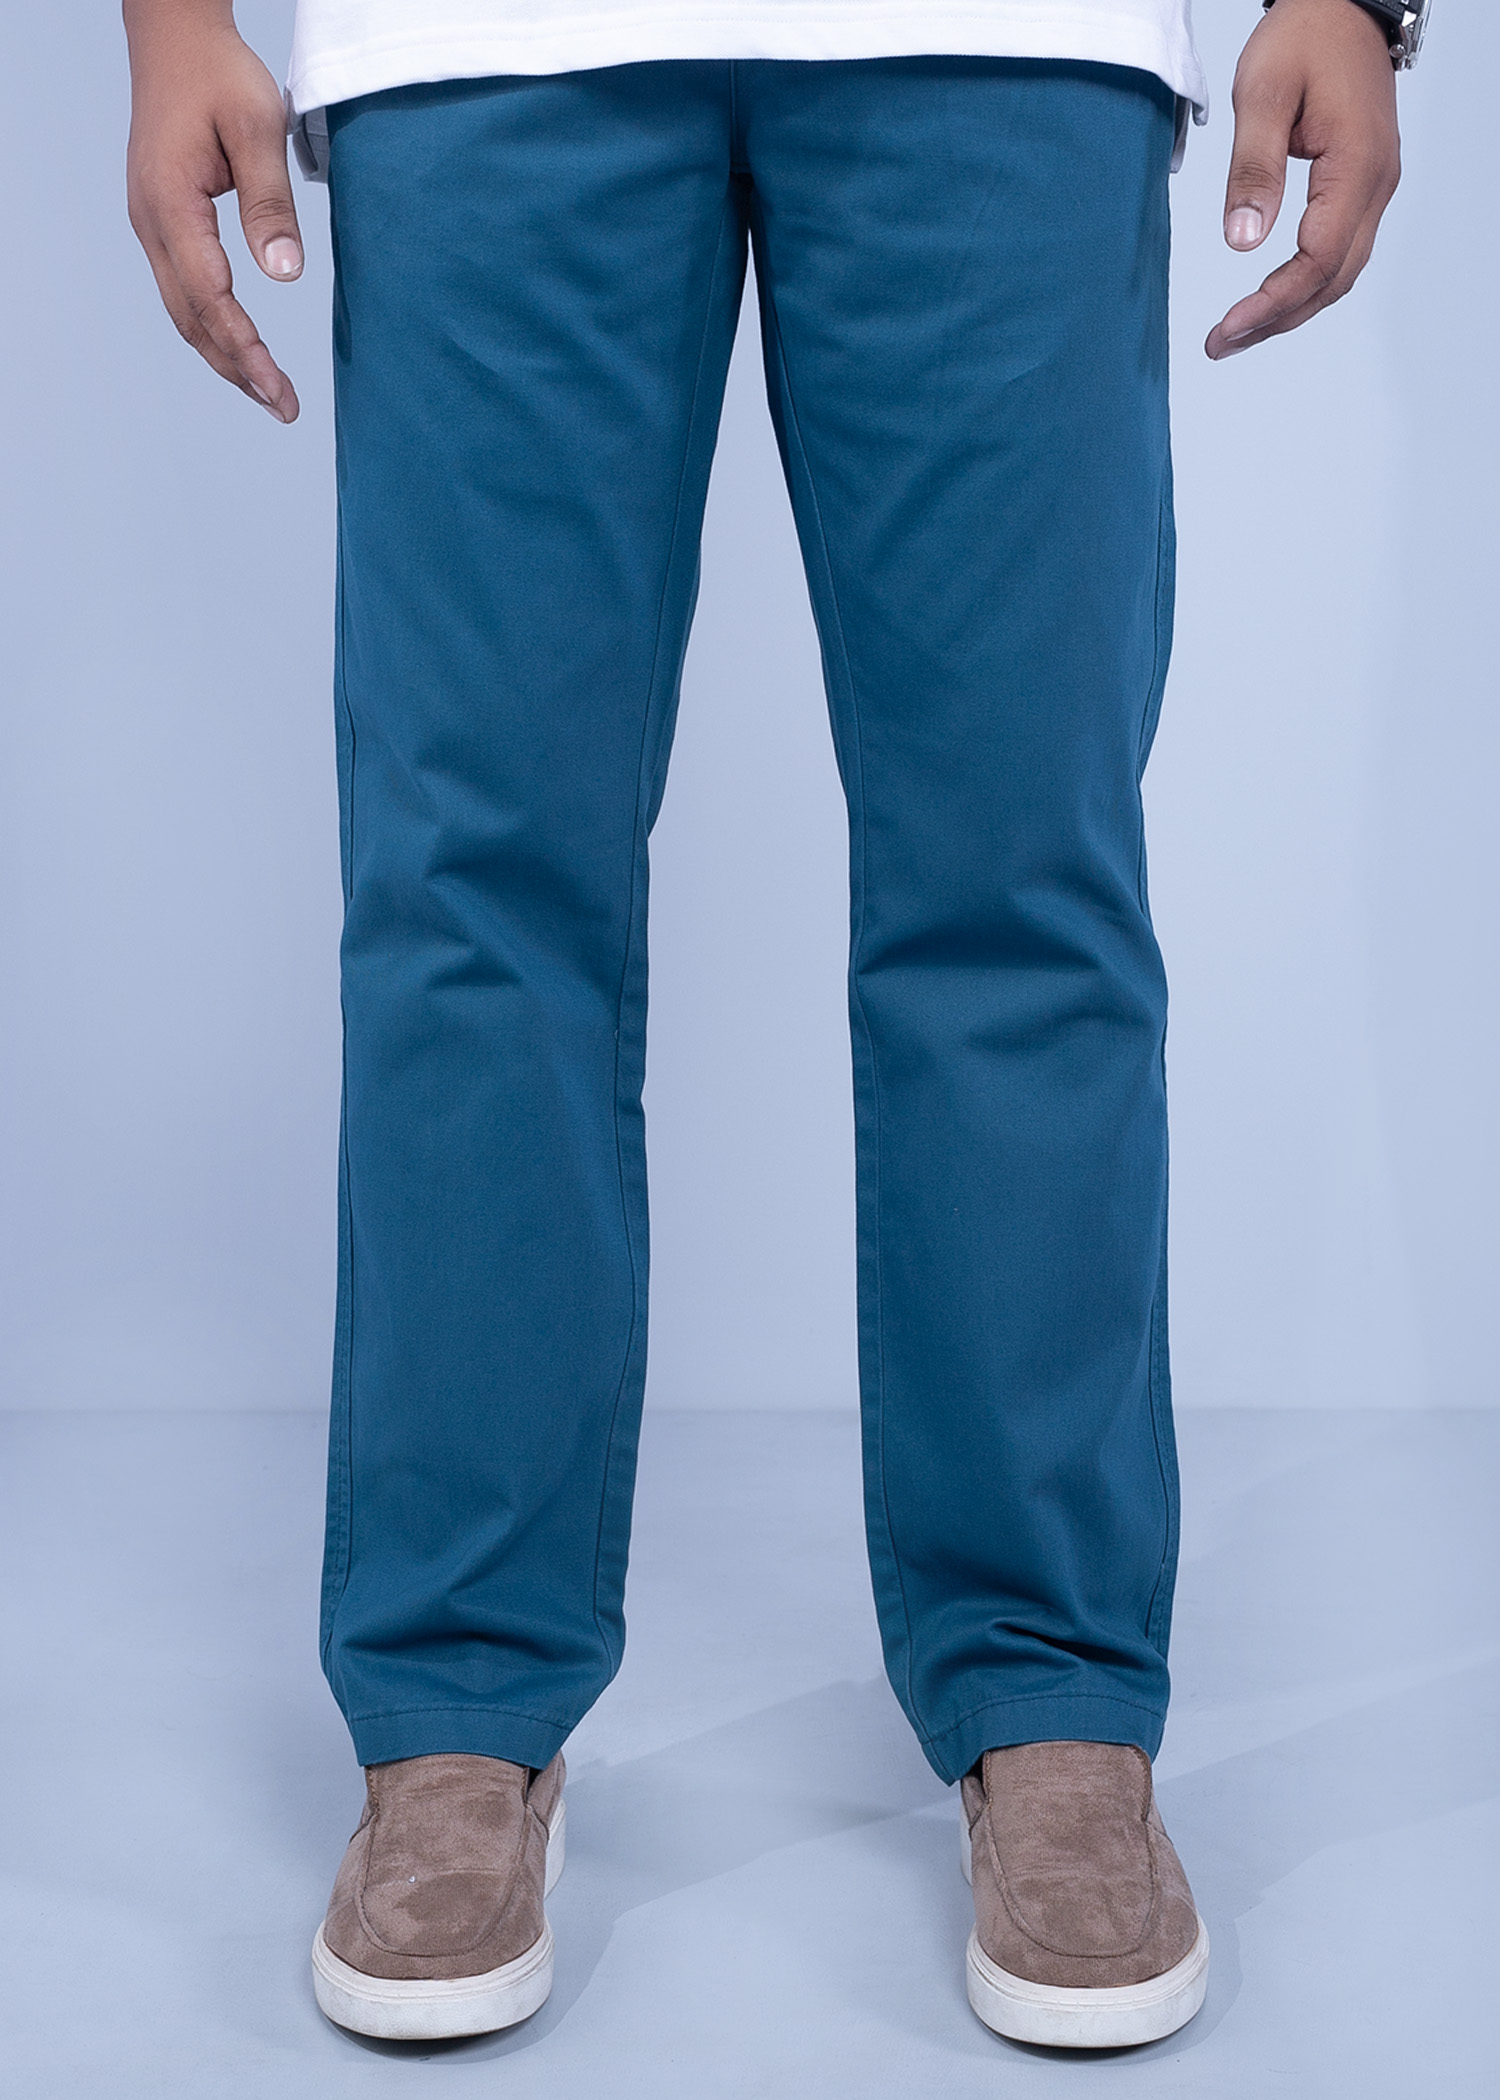 zagreb chino pant teal color half front view